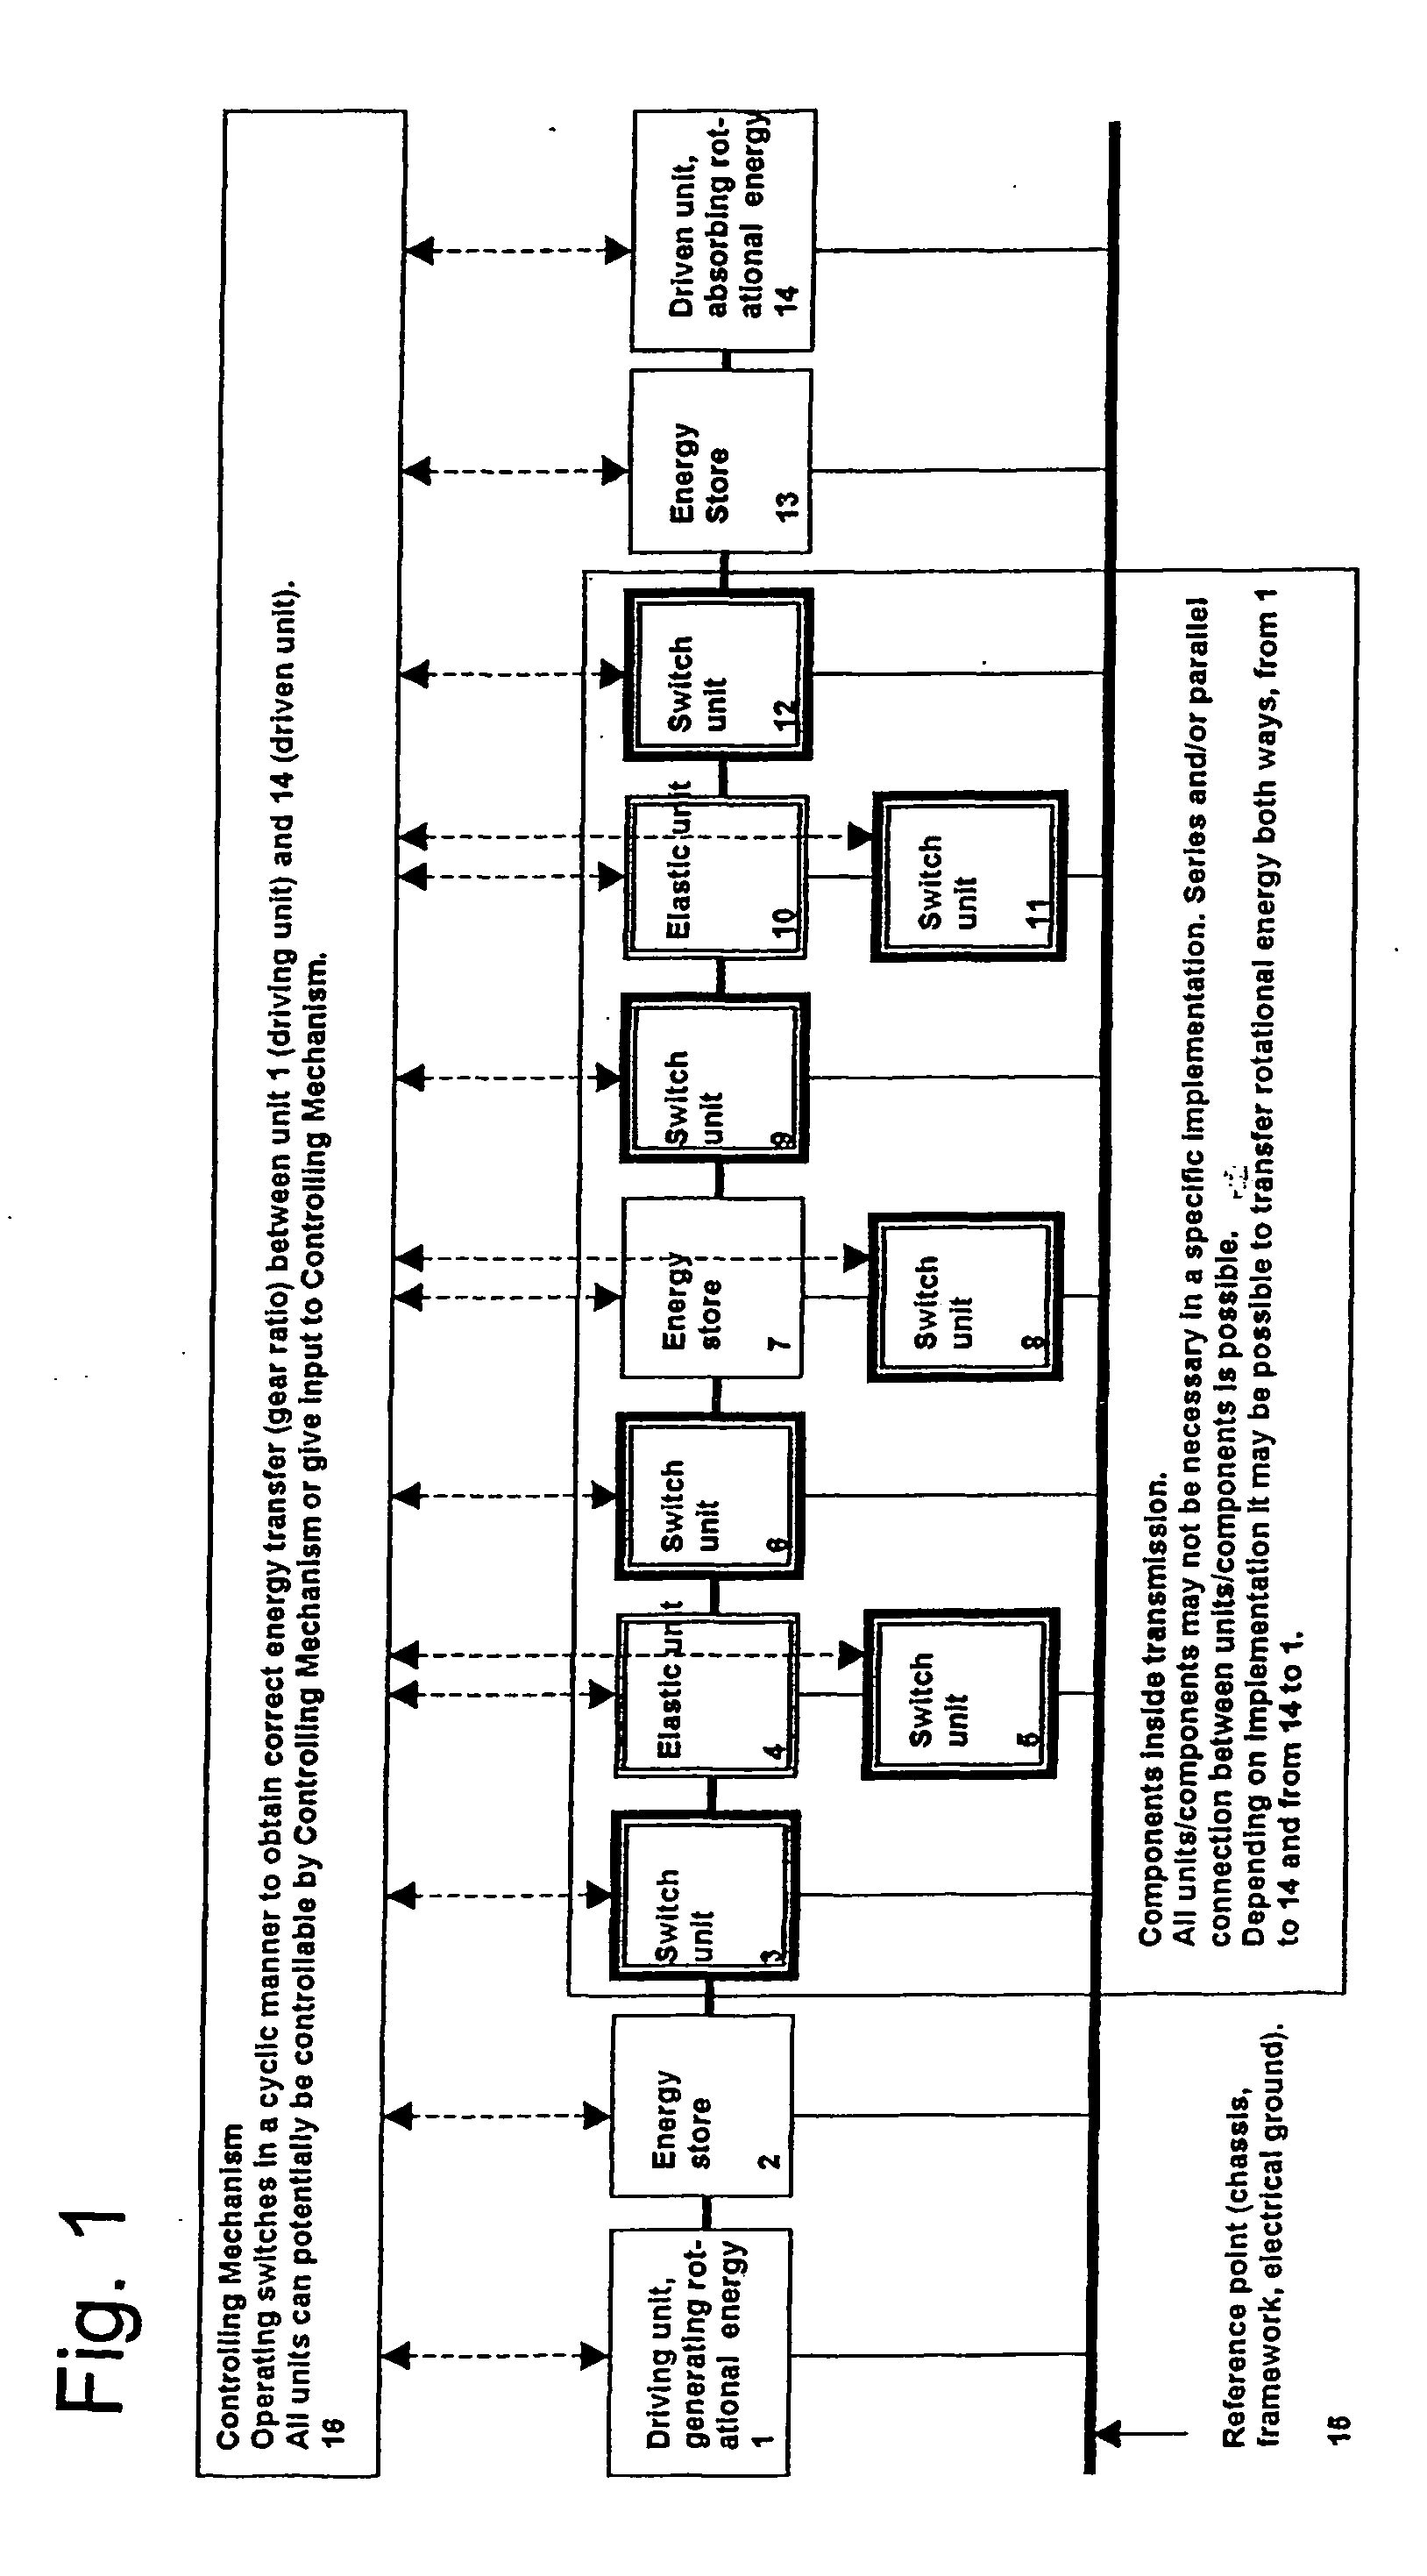 Method and means for variably transferring rotation energy